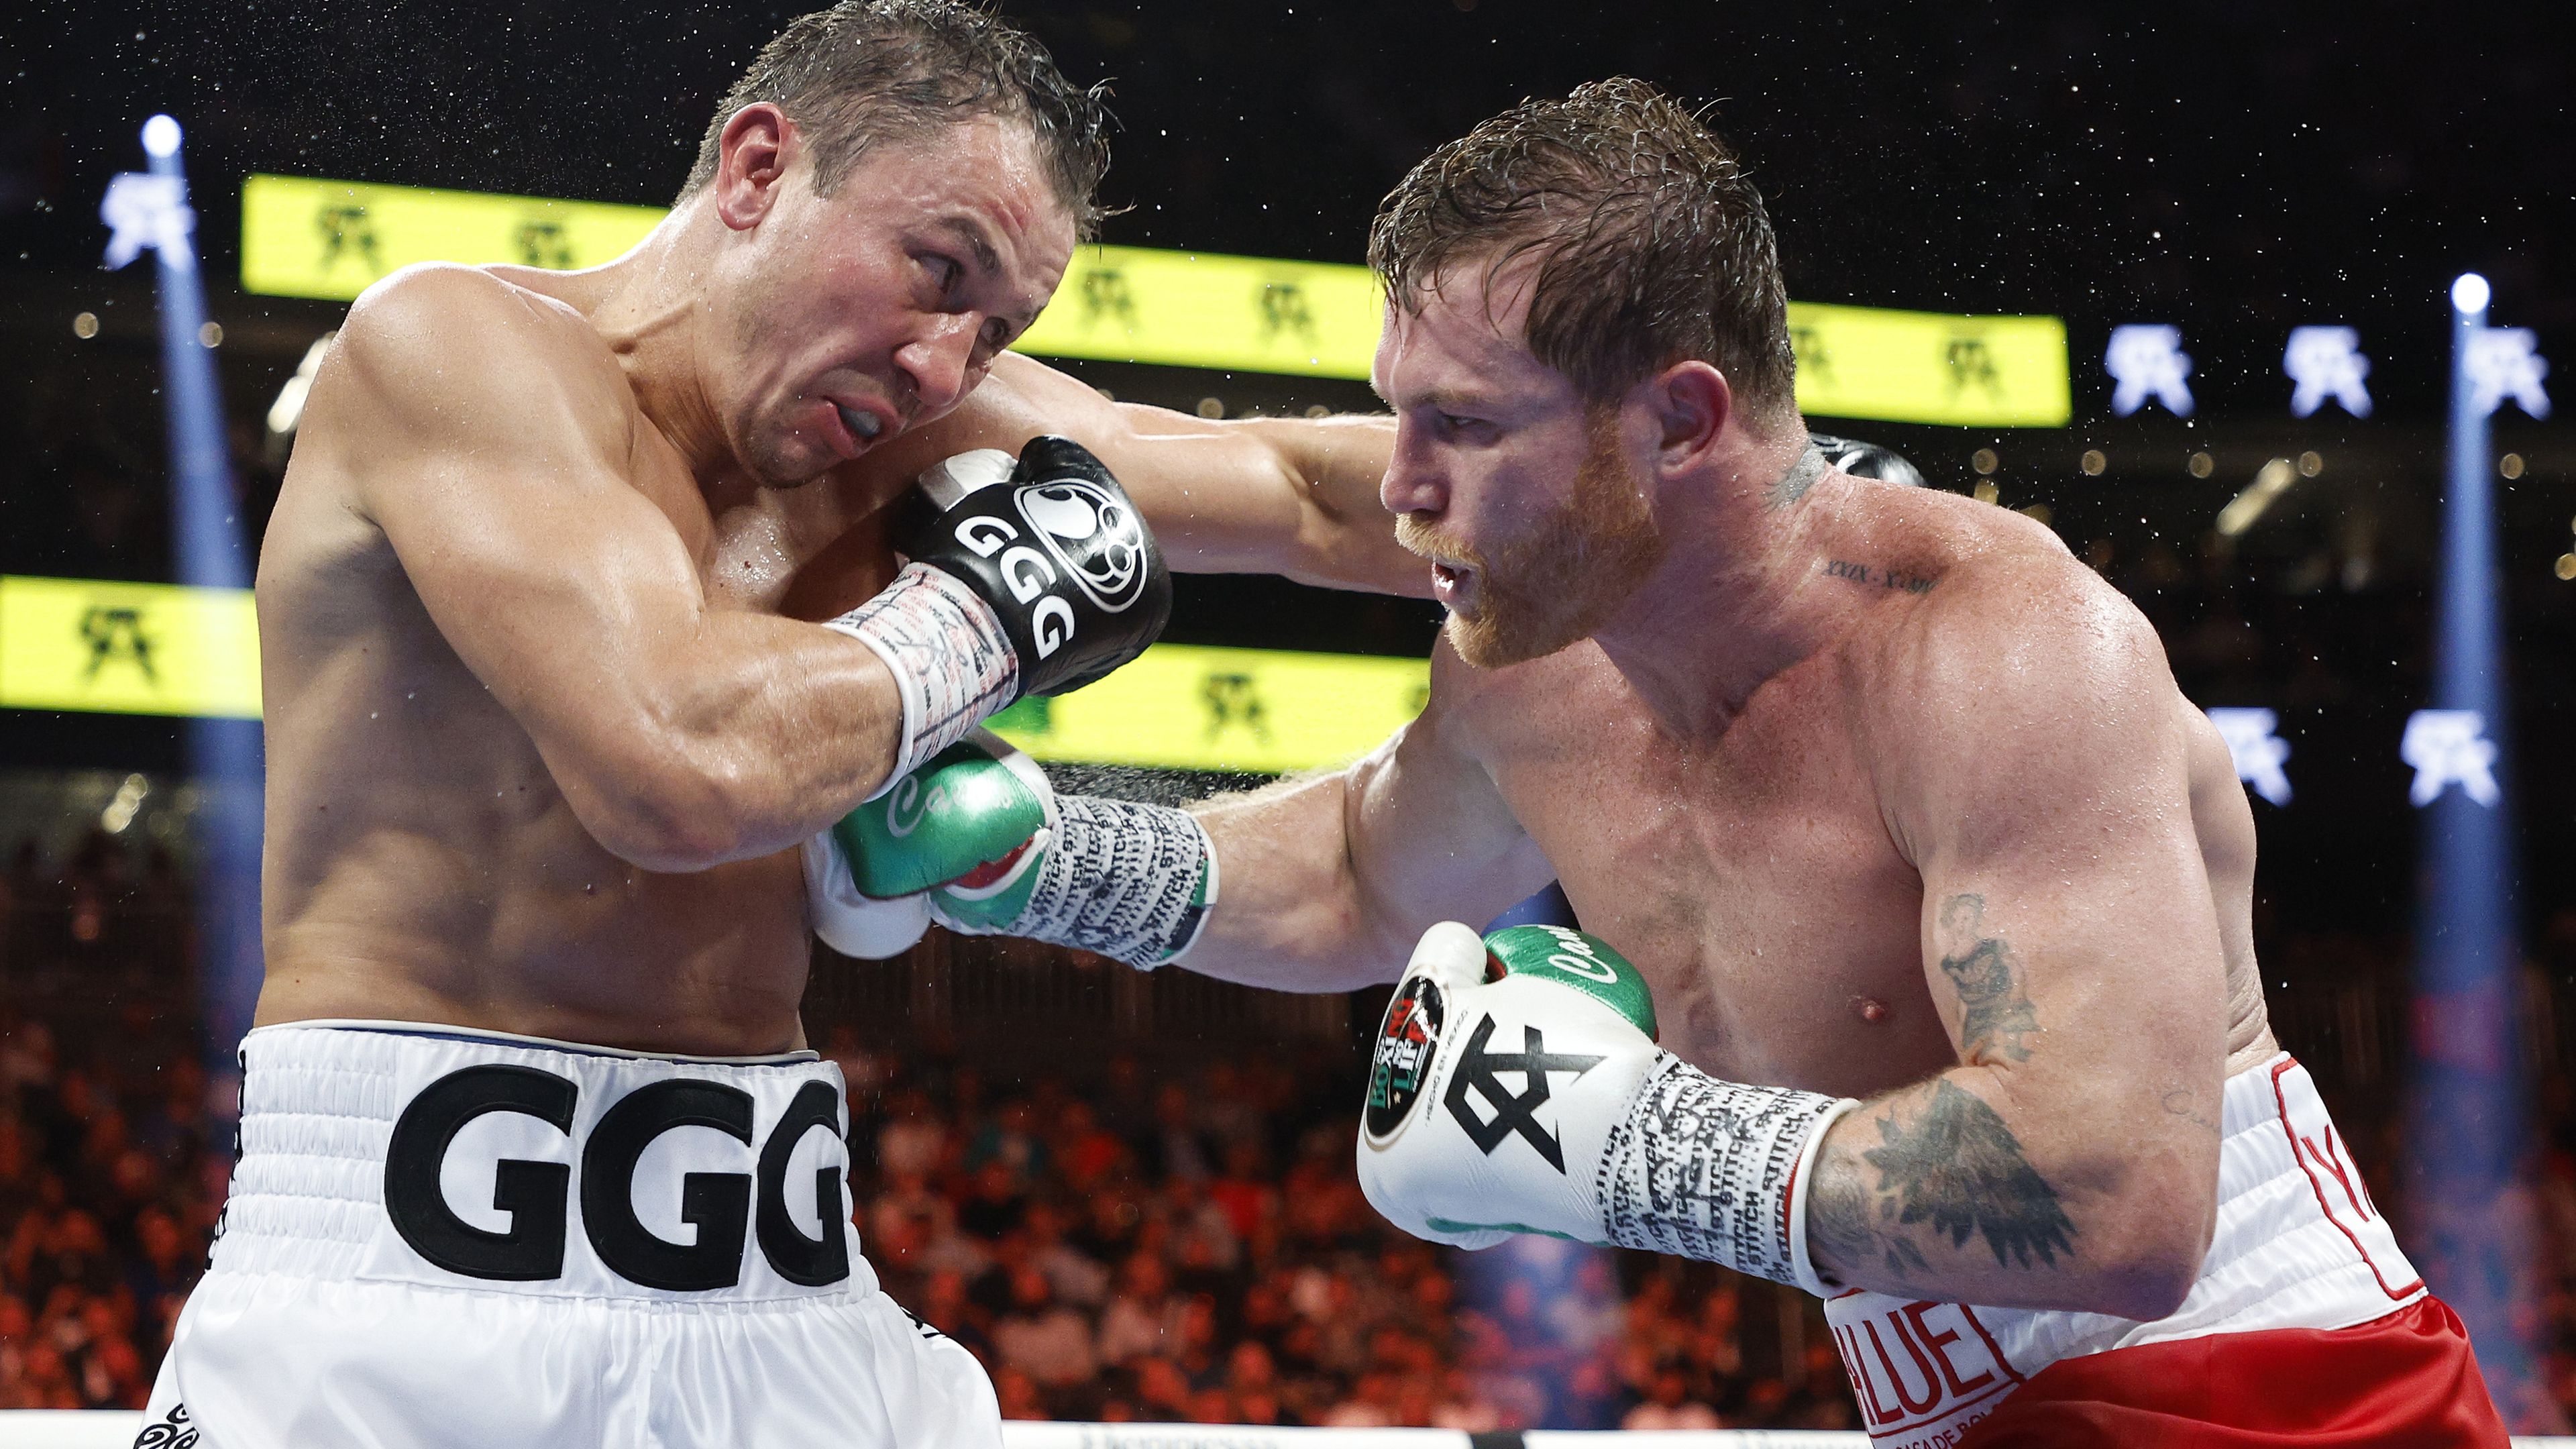 Judges ripped after boxing champion Canelo Alvarez dominates bitter rival Gennady Golovkin in trilogy fight